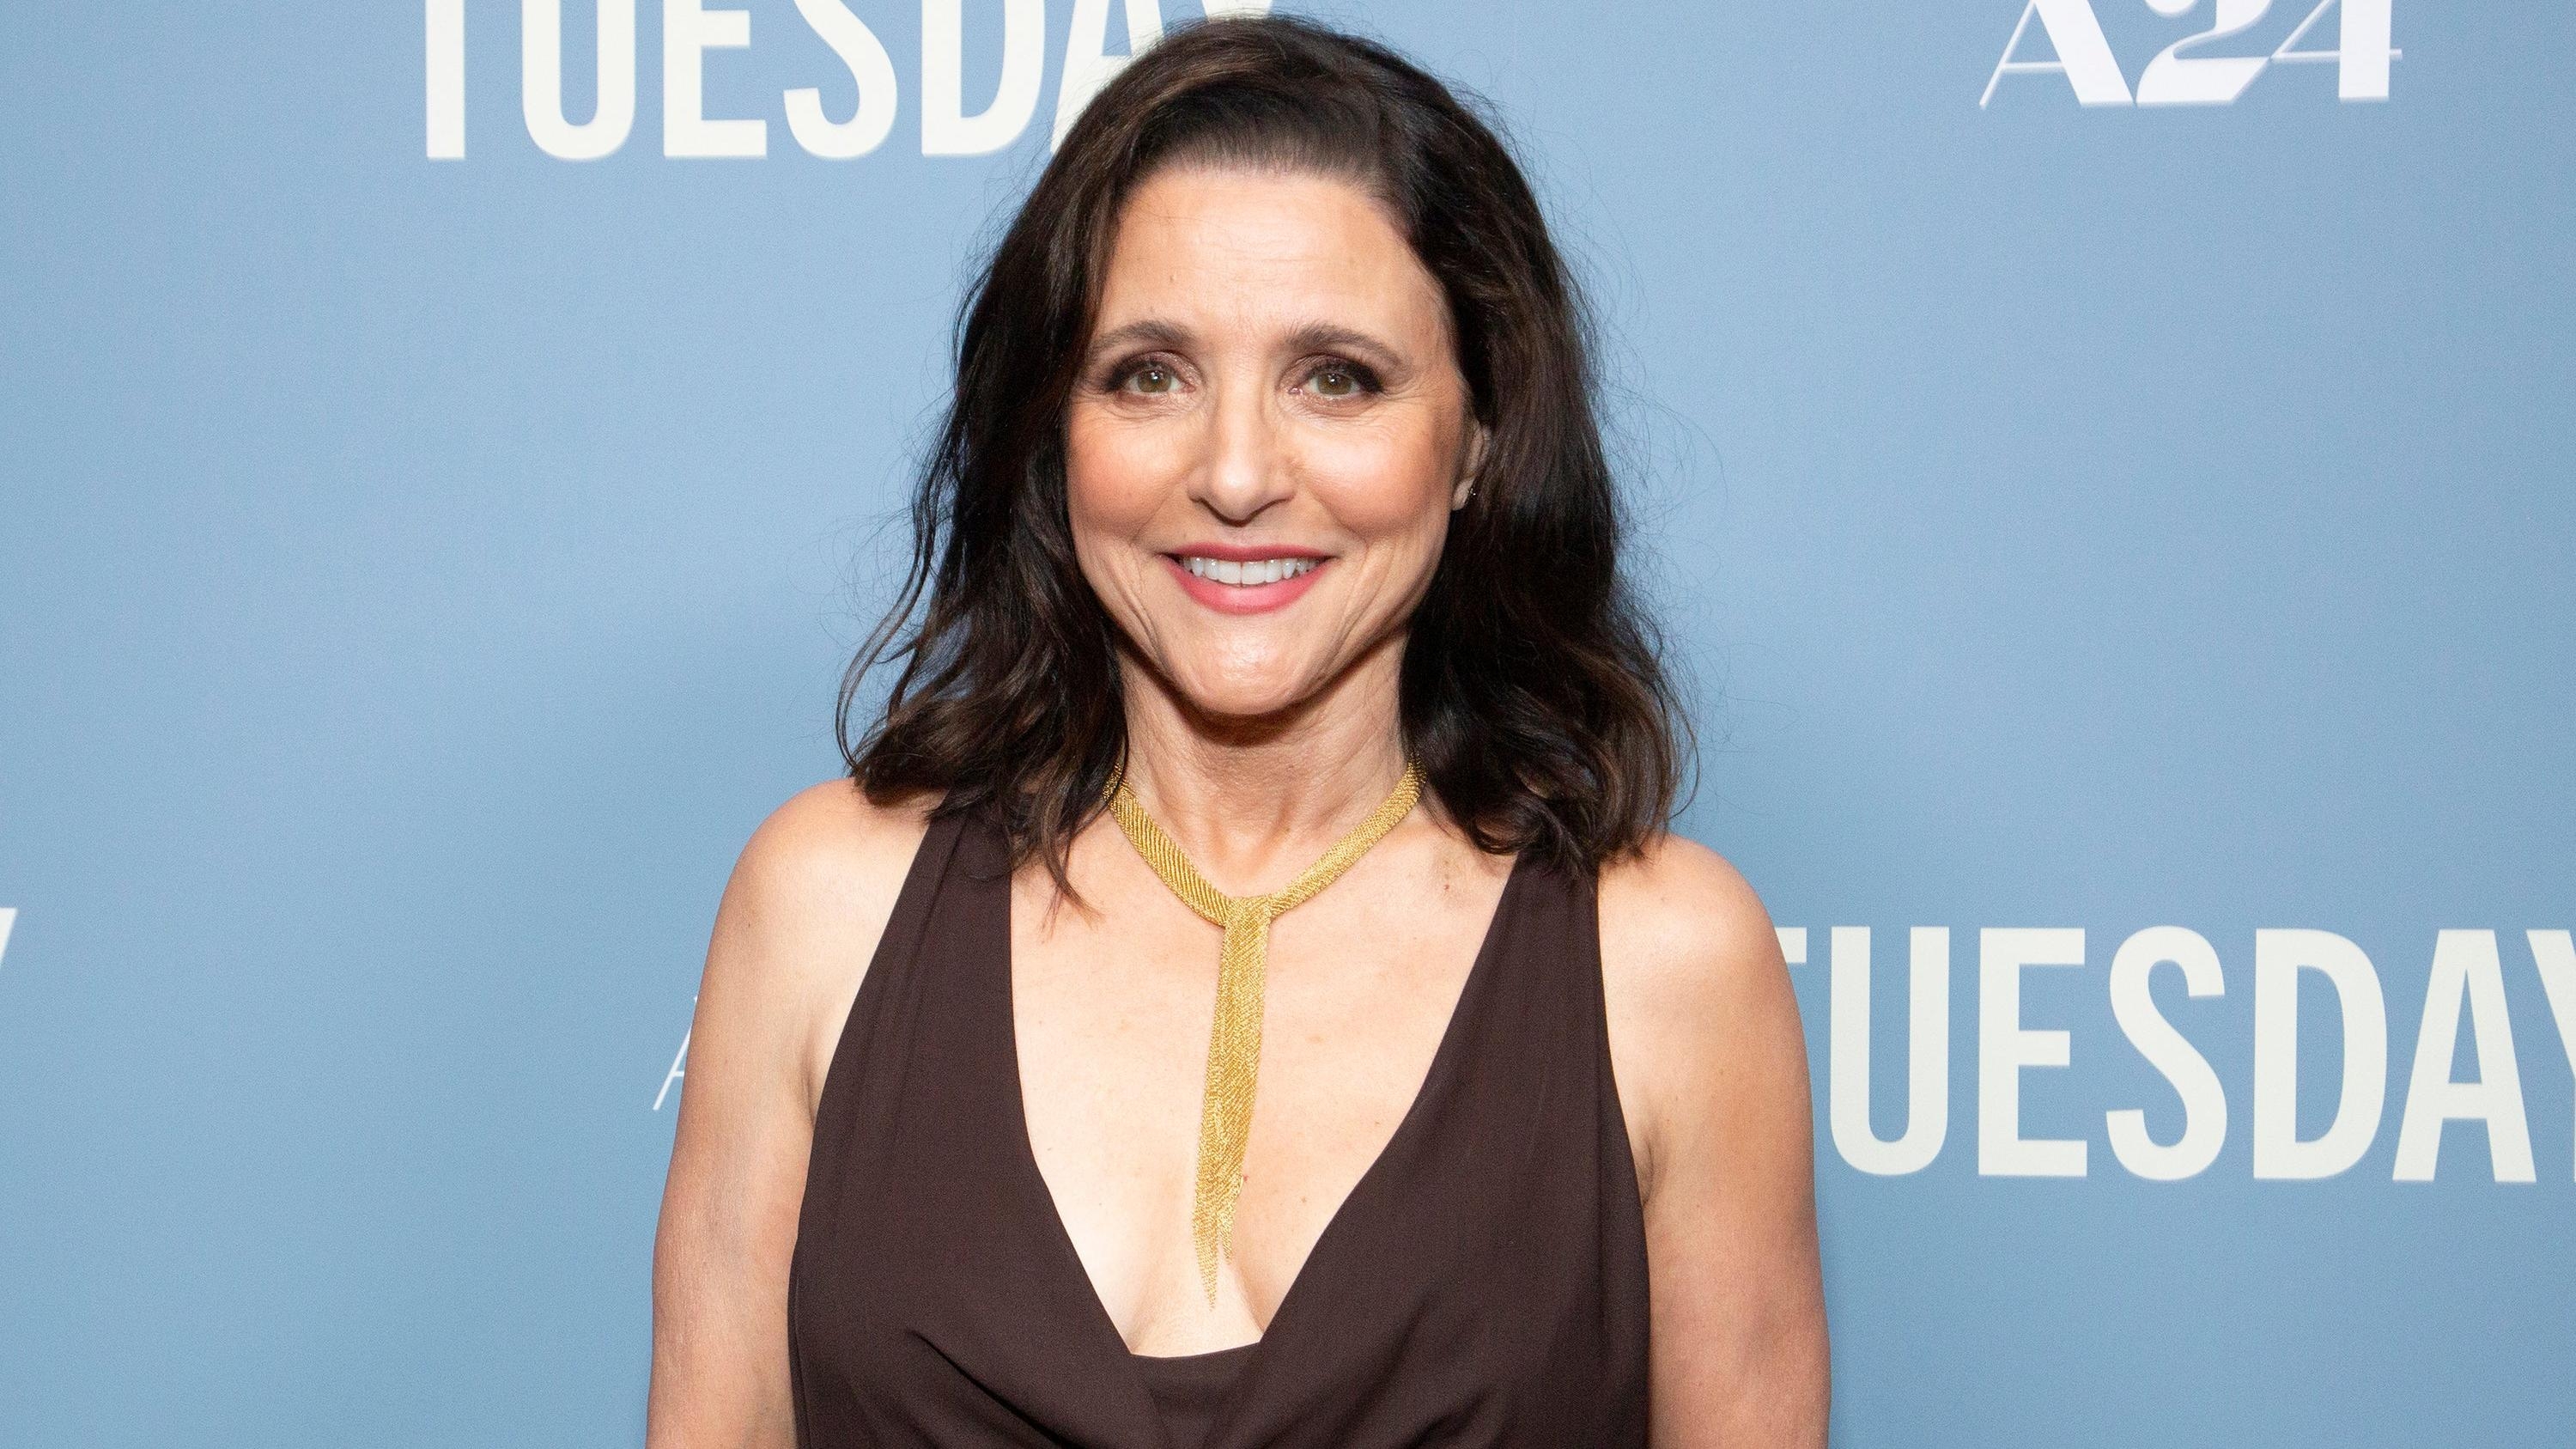 Julia Louis-Dreyfus finds railing against political correctness to be a “red flag”